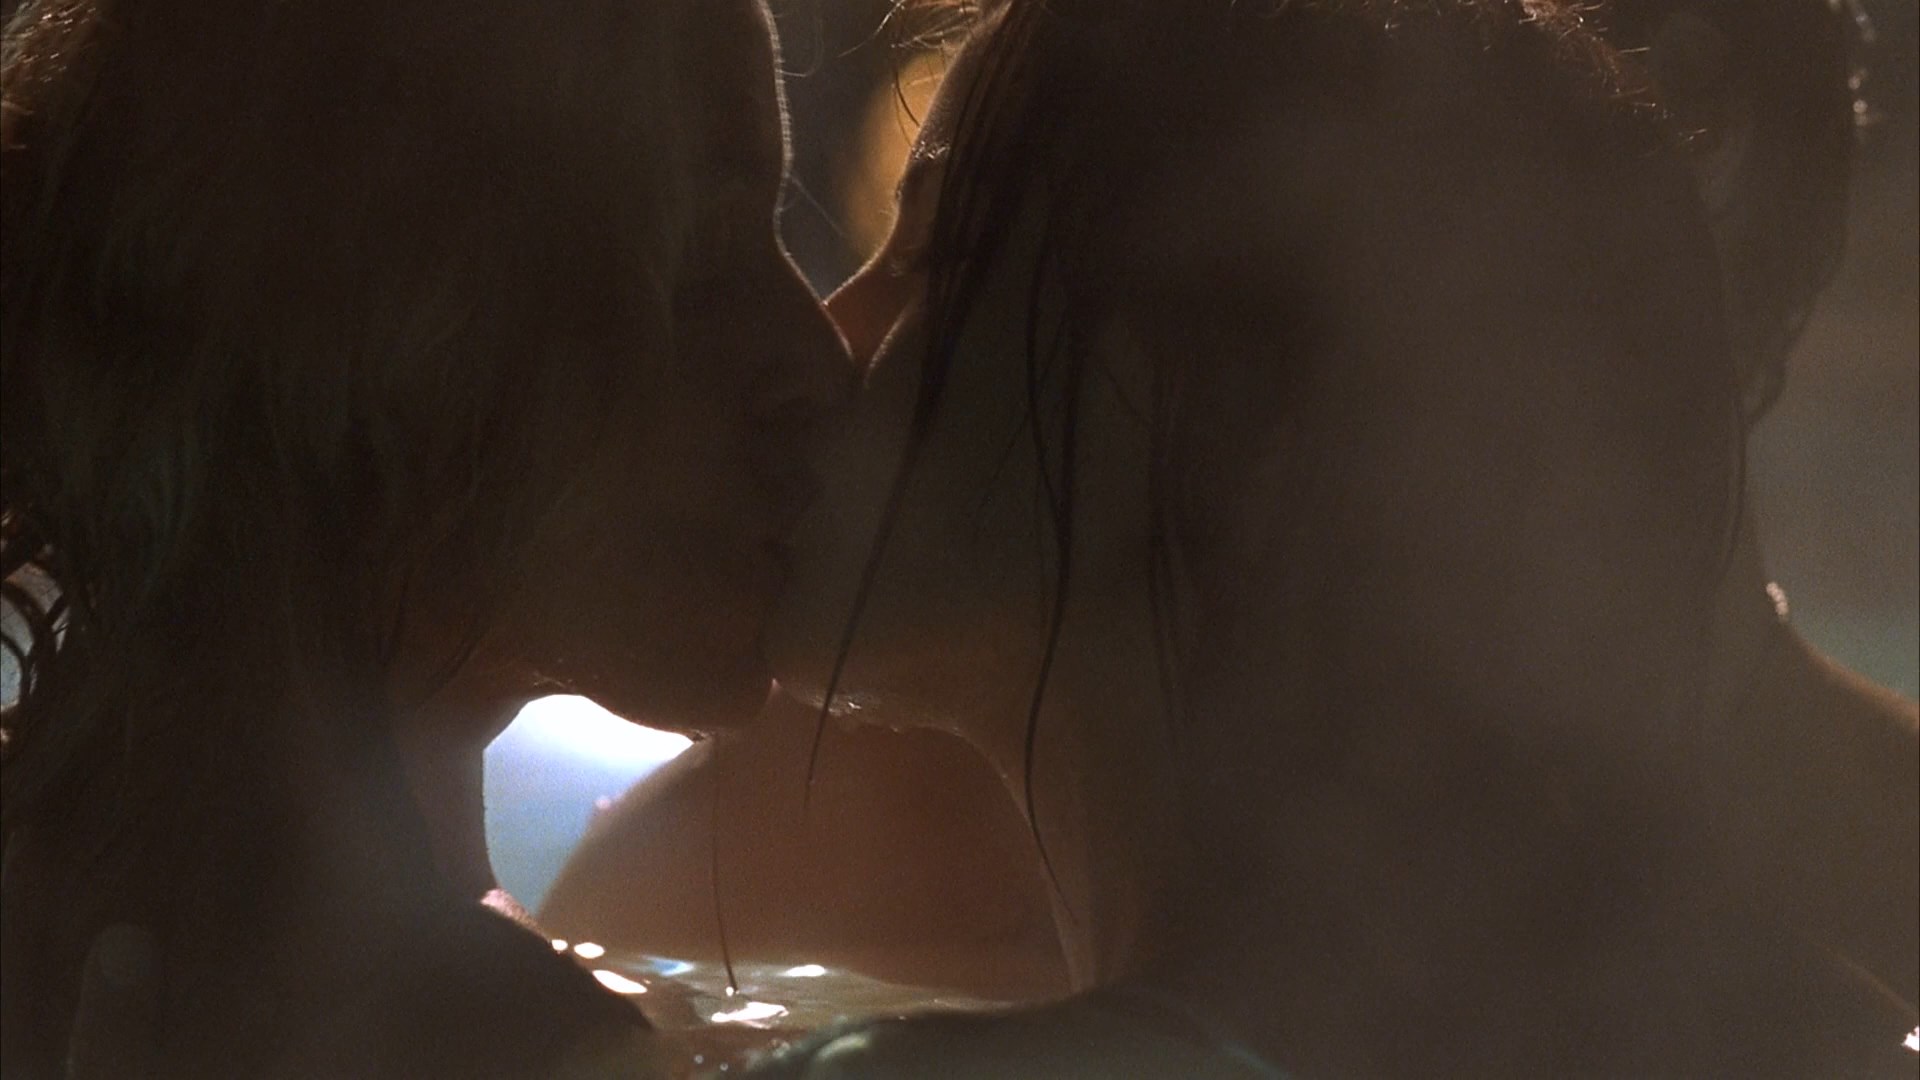 Another scene where Kate and Frances are making out.